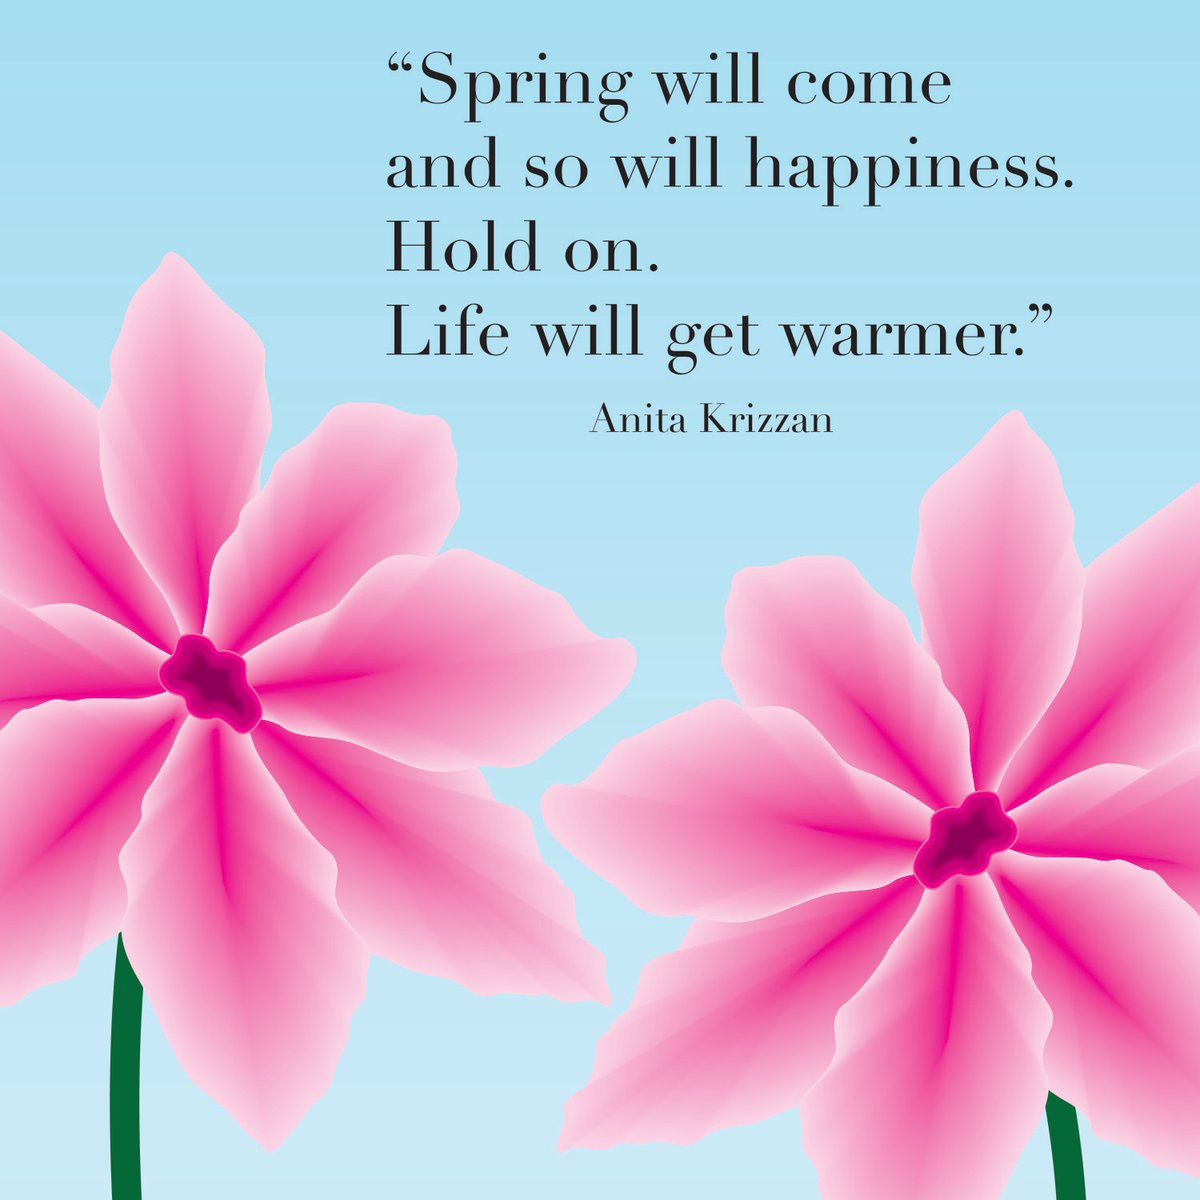 Wishing you warmth and happiness today. #spring #happy #warmth #happiness #tuesday #staystrong #staypositive